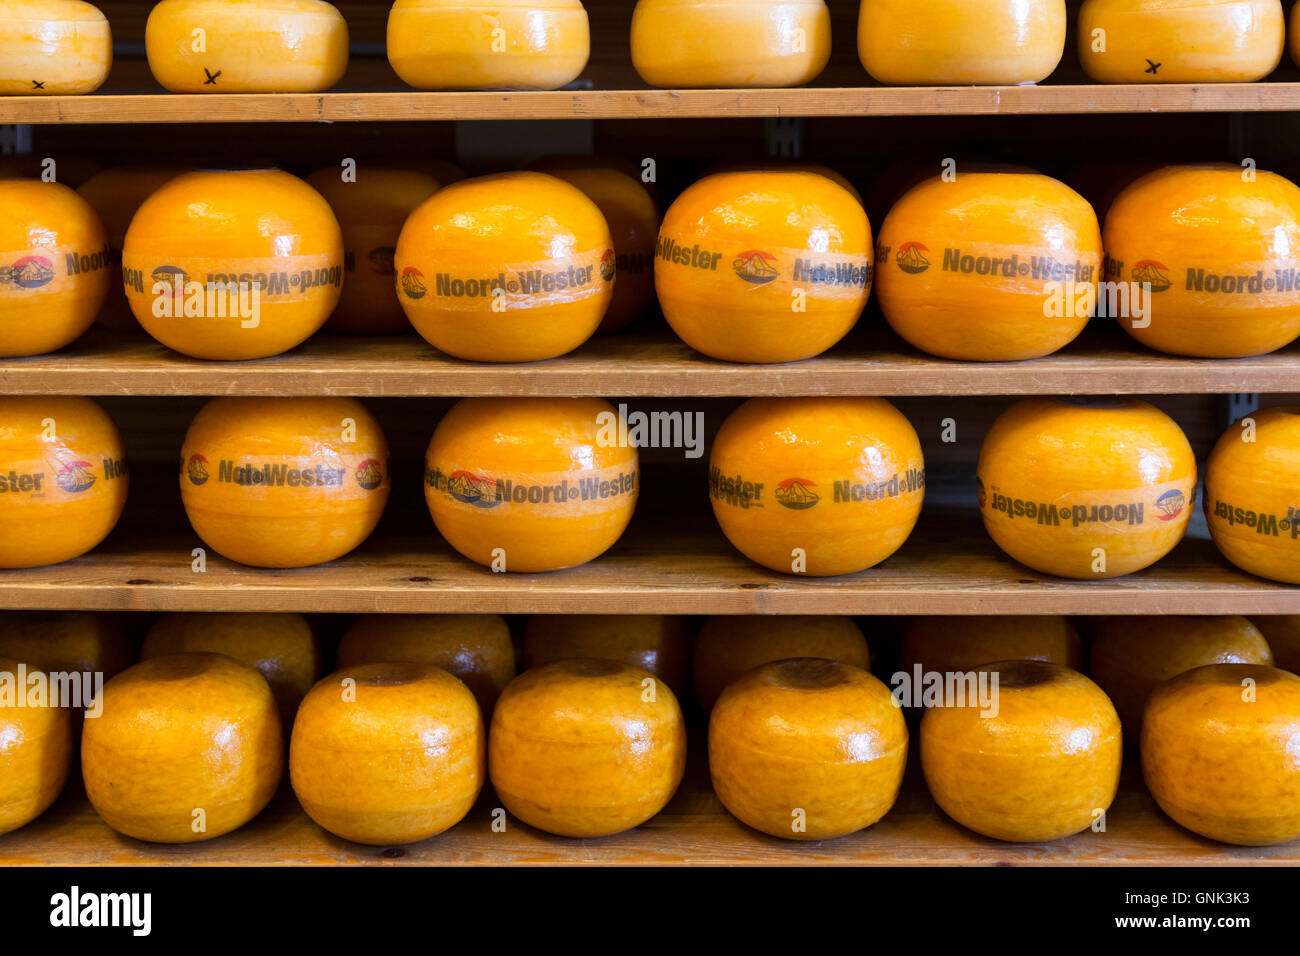 Edam cheese Noord Wester display on shelves in food store in the town of Edam, The Netherlands Stock Photo